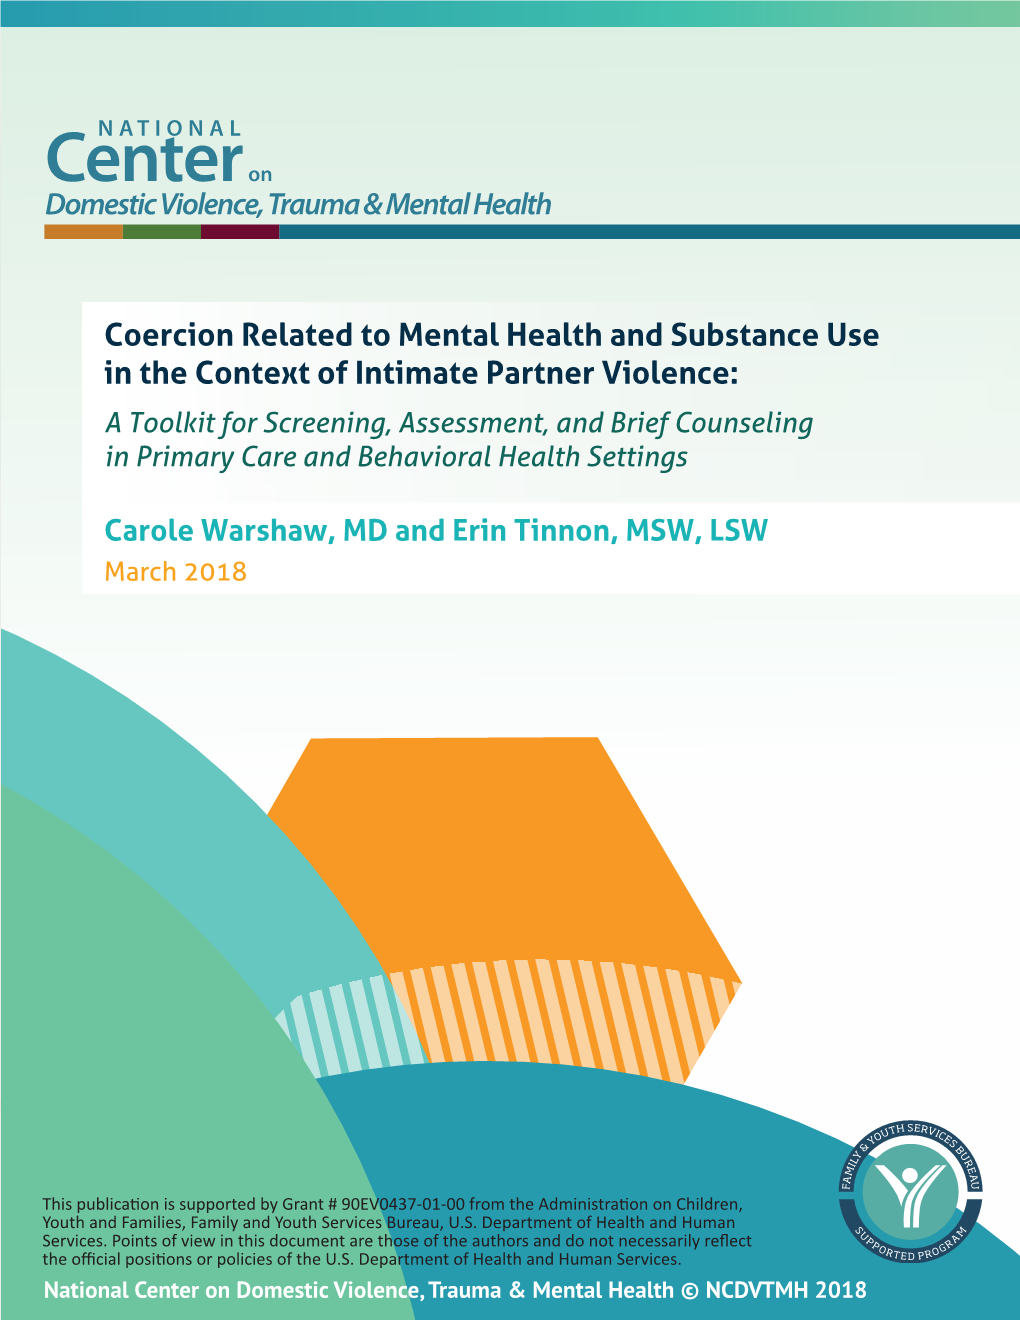 Coercion Related to Mental Health and Substance Use in the Context